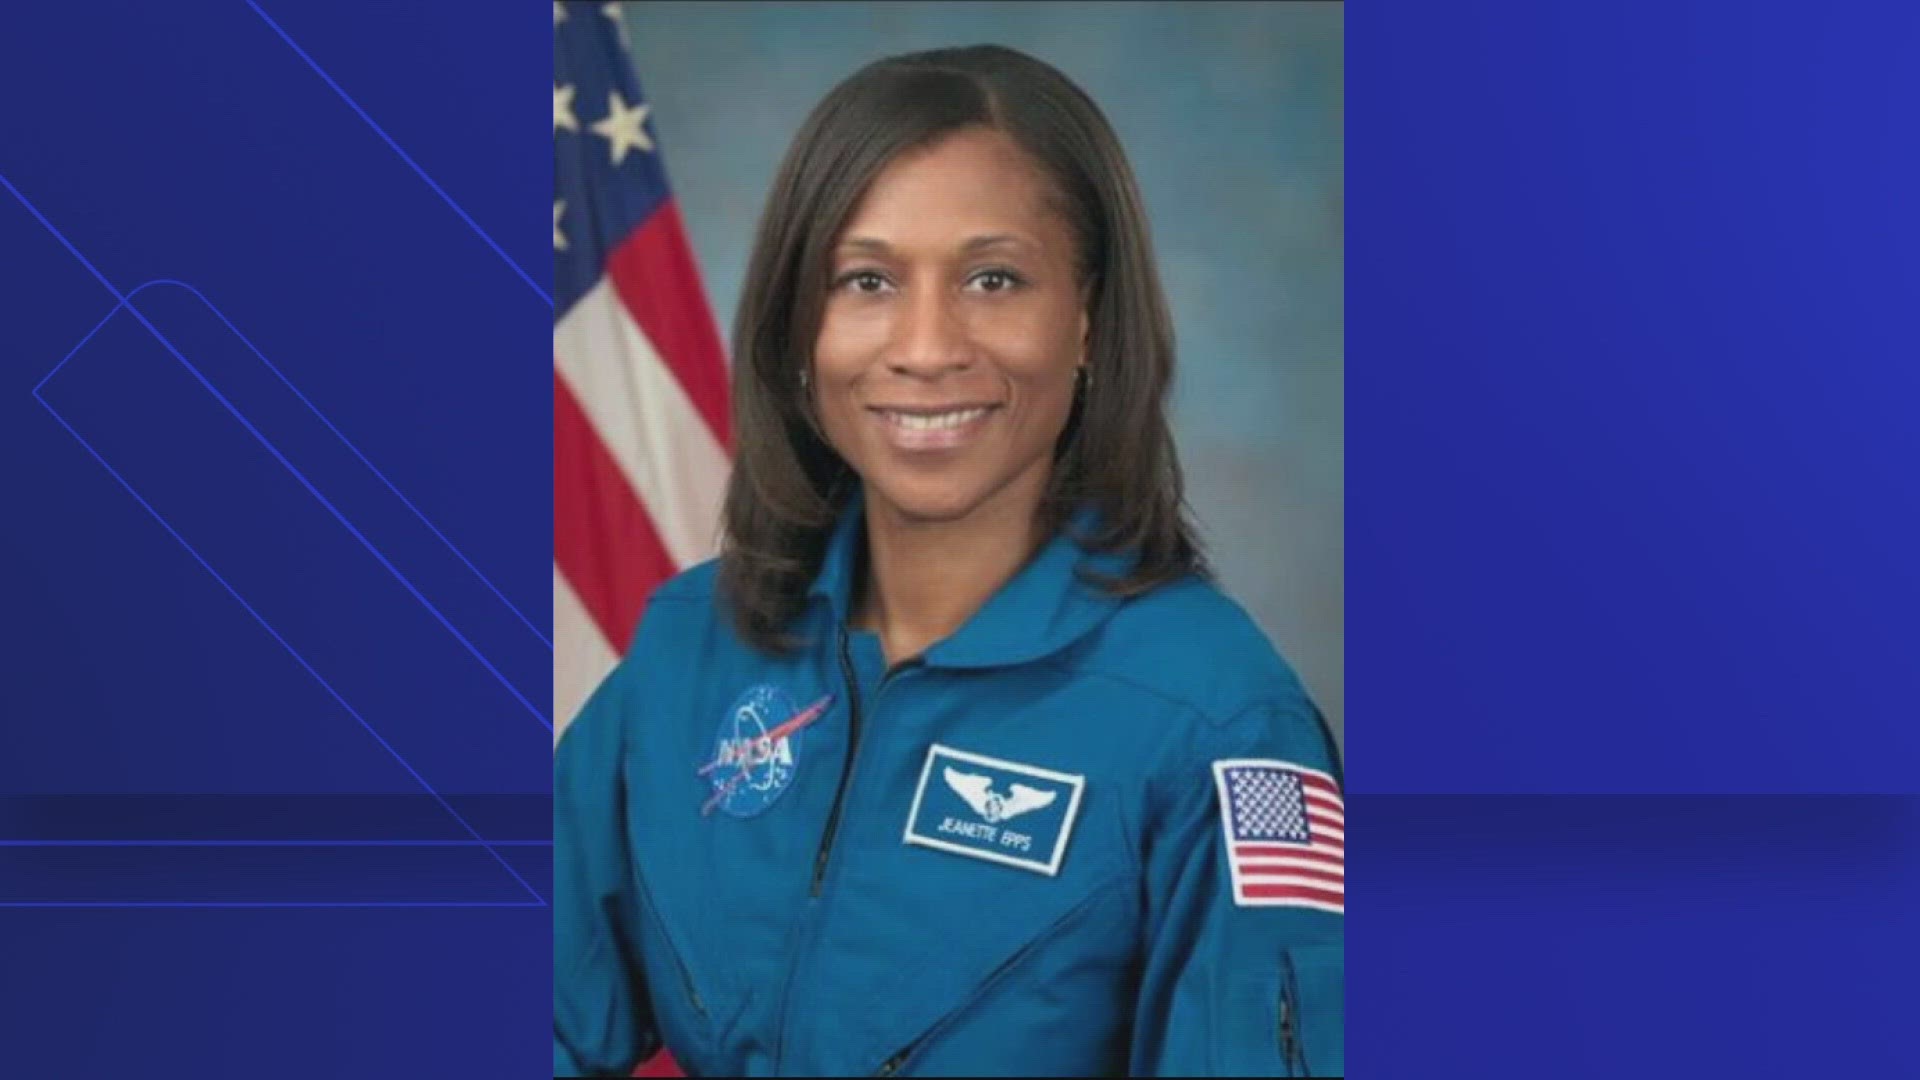 University of Maryland graduate Jeannette Epps will be heading to space. She's going to the International Space Station as part of the latest Space-X mission.